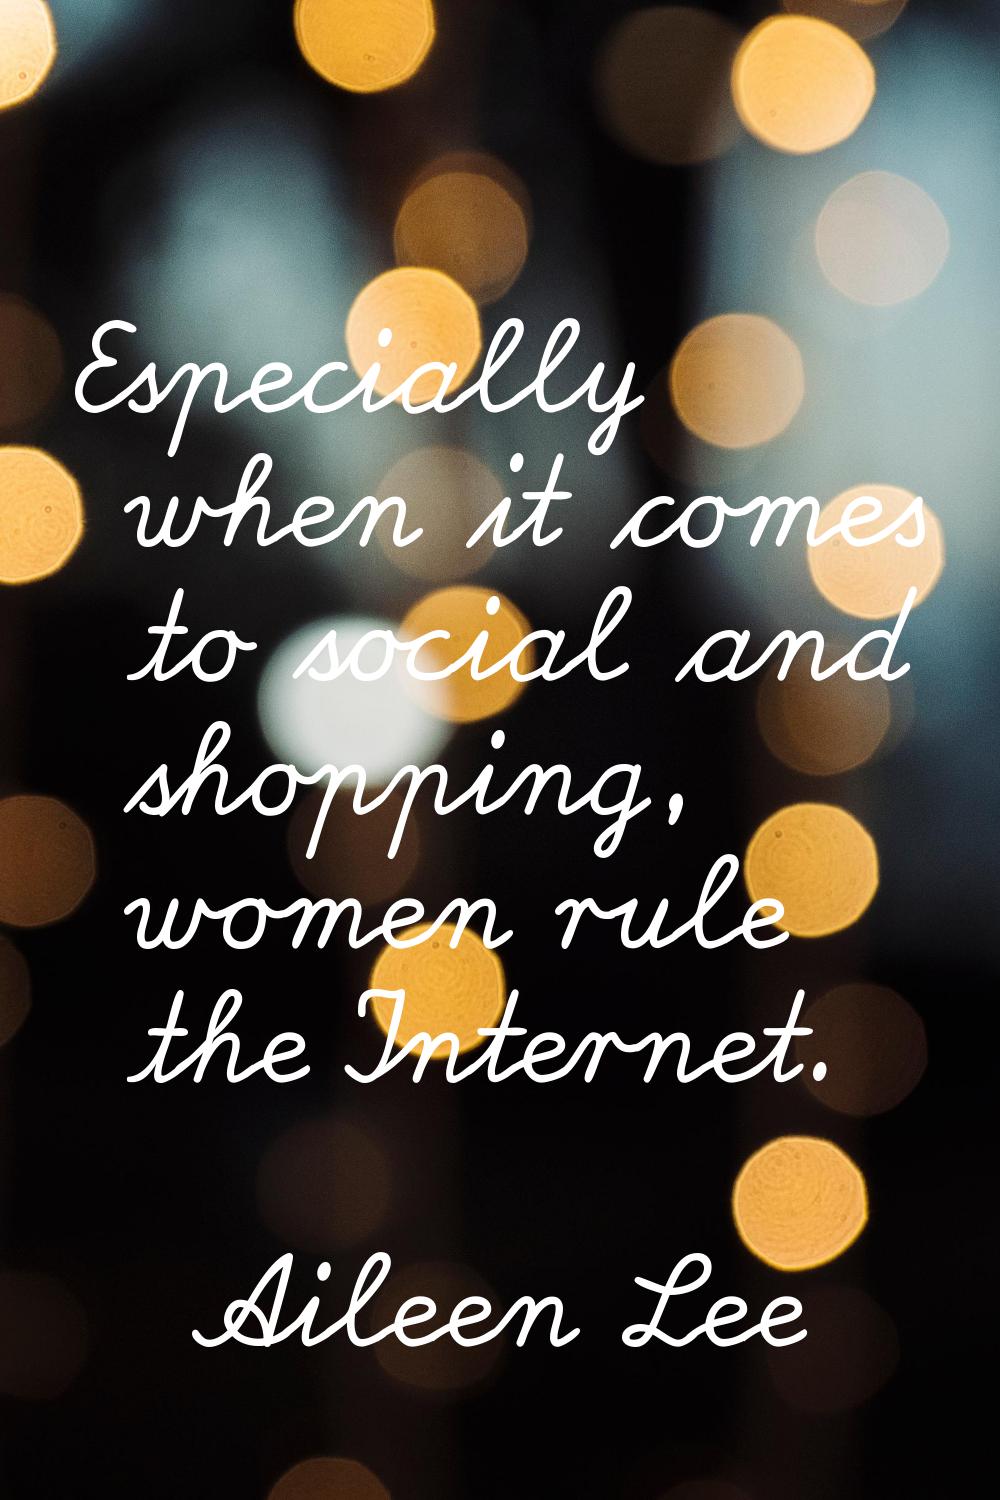 Especially when it comes to social and shopping, women rule the Internet.